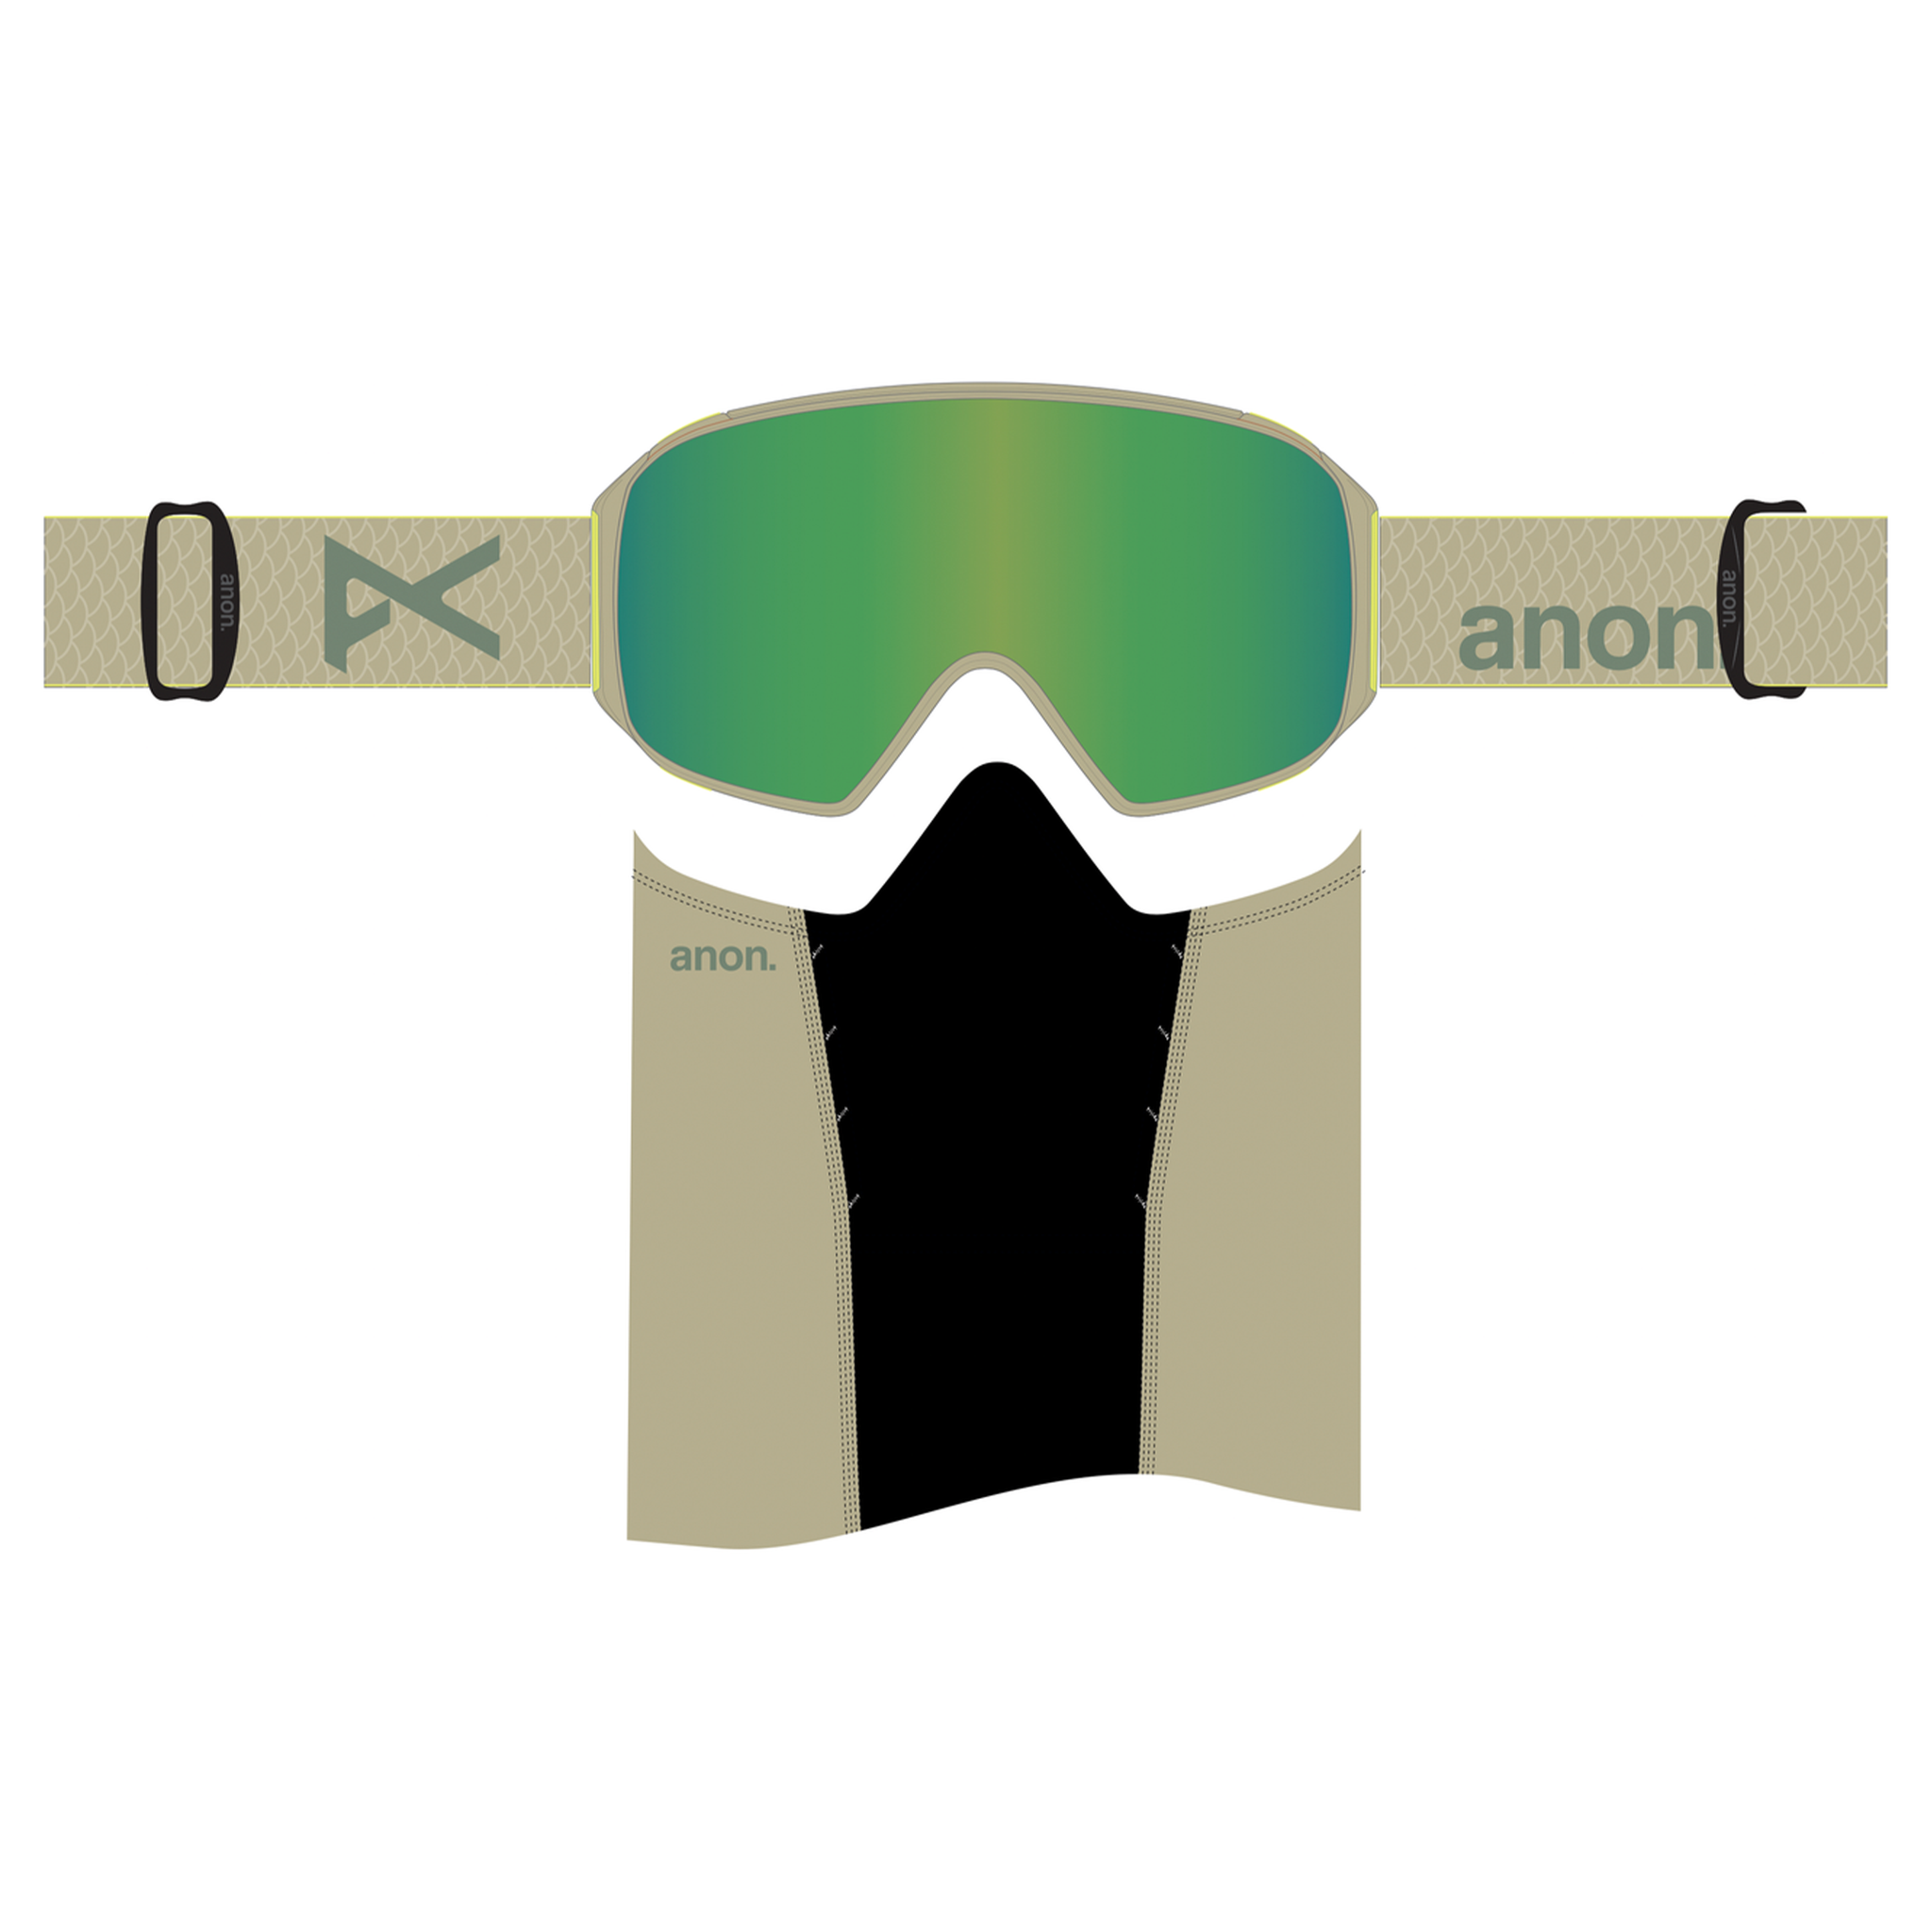 ANON M4S CYLINDRICAL GOGGLES - MUSHROOM/PERCEIVE VARIABLE GREEN (LOW BRIDGE) +MFI MASK + SPARE LENS